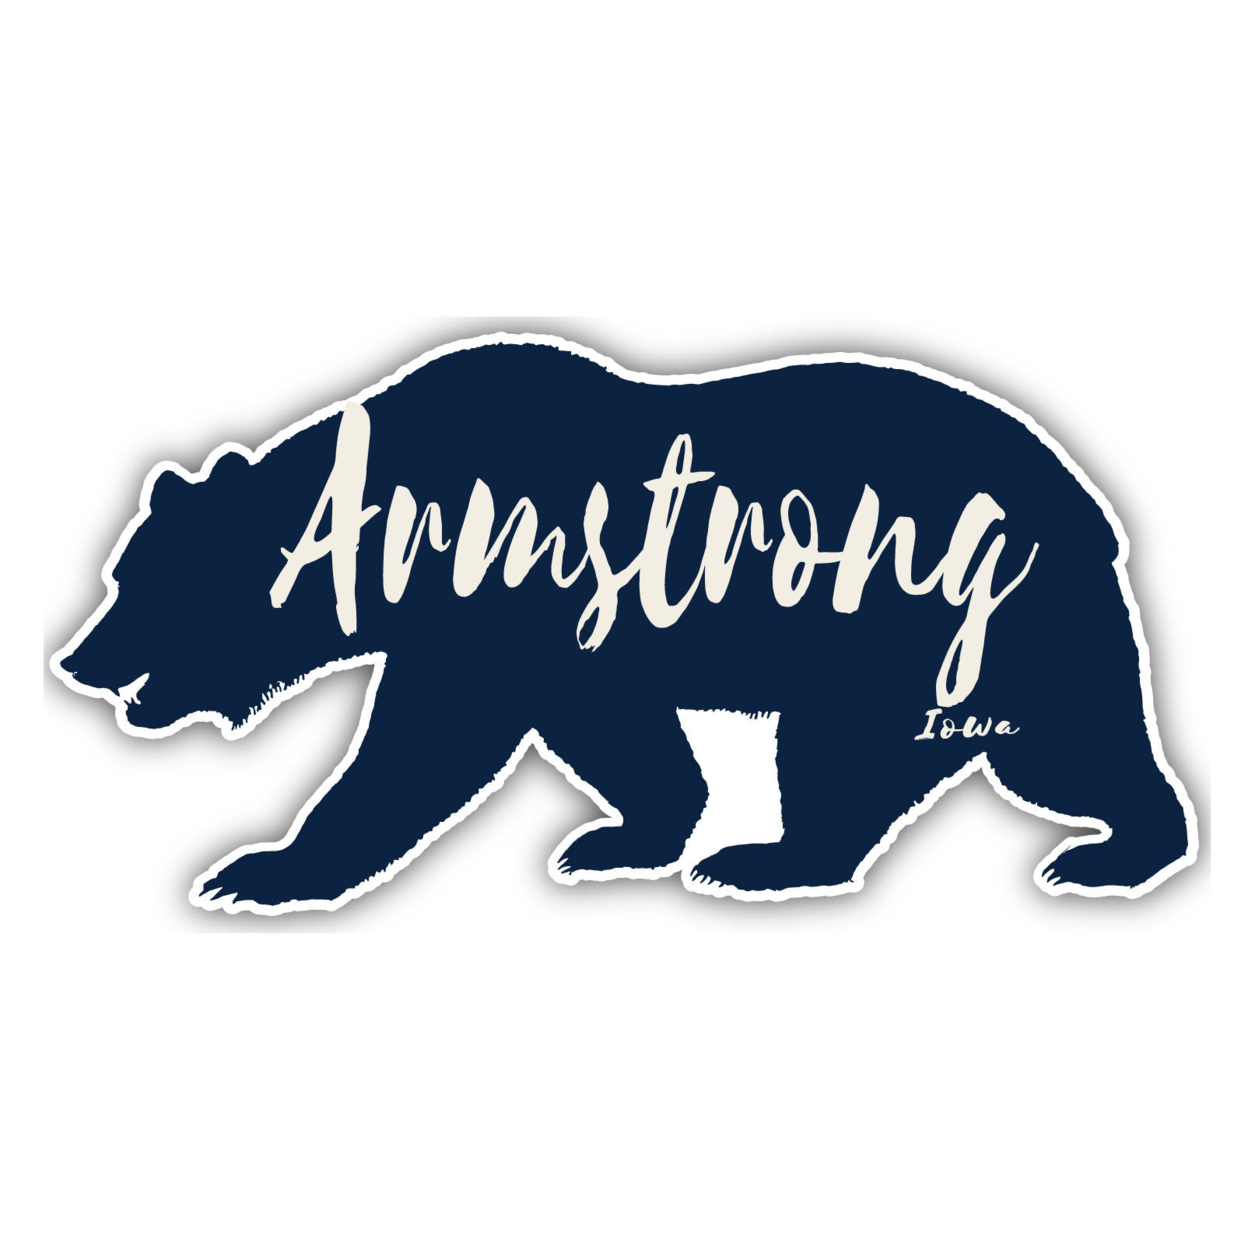 Armstrong Iowa Souvenir Decorative Stickers (Choose Theme And Size) - Single Unit, 10-Inch, Bear